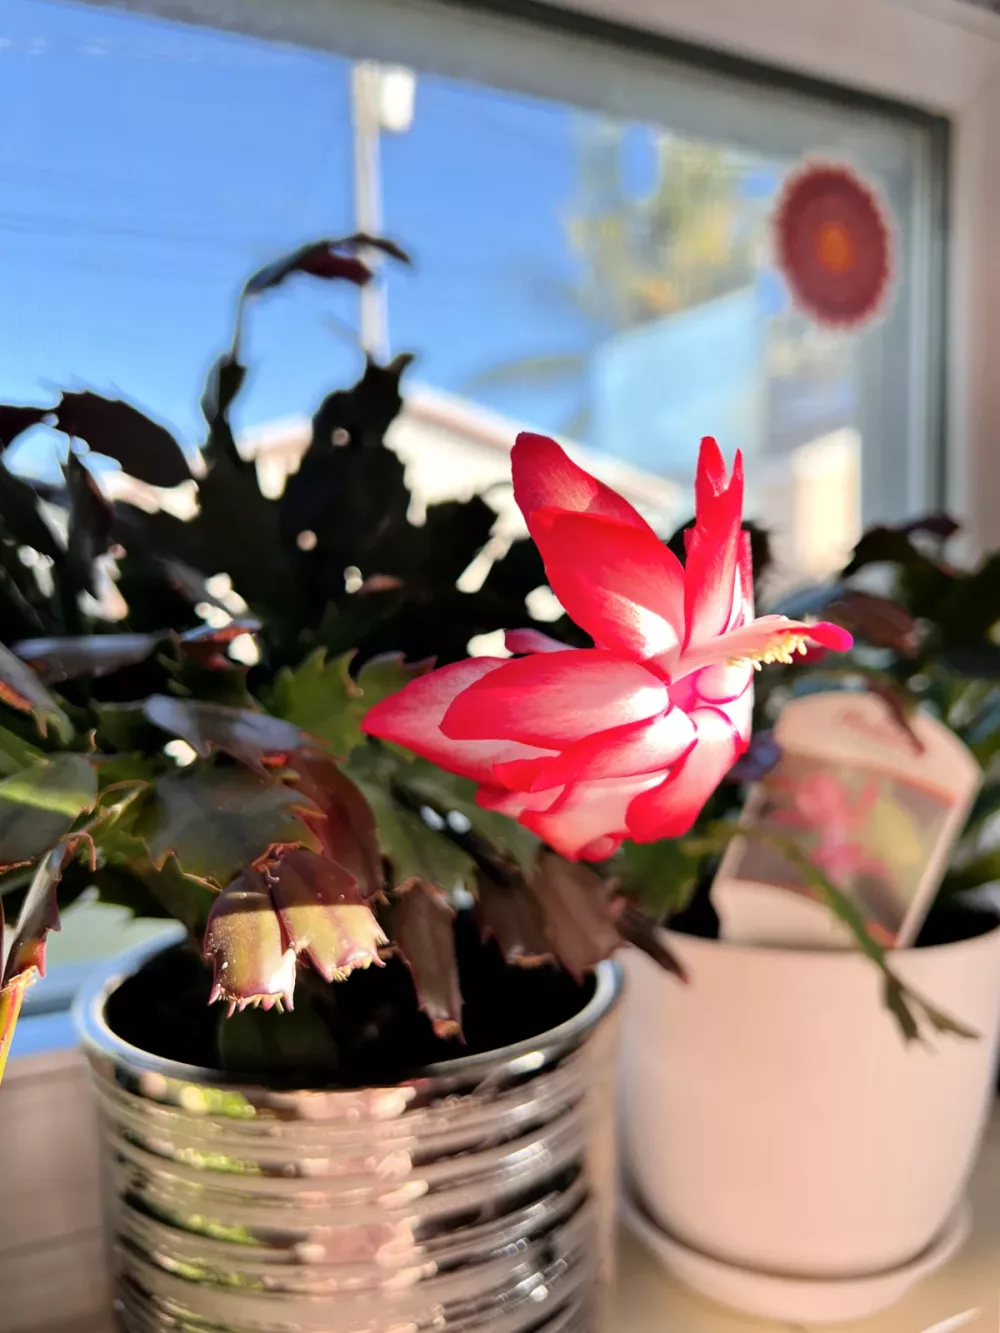 Plant Care Tips to get a Holiday Cactus to Bloom